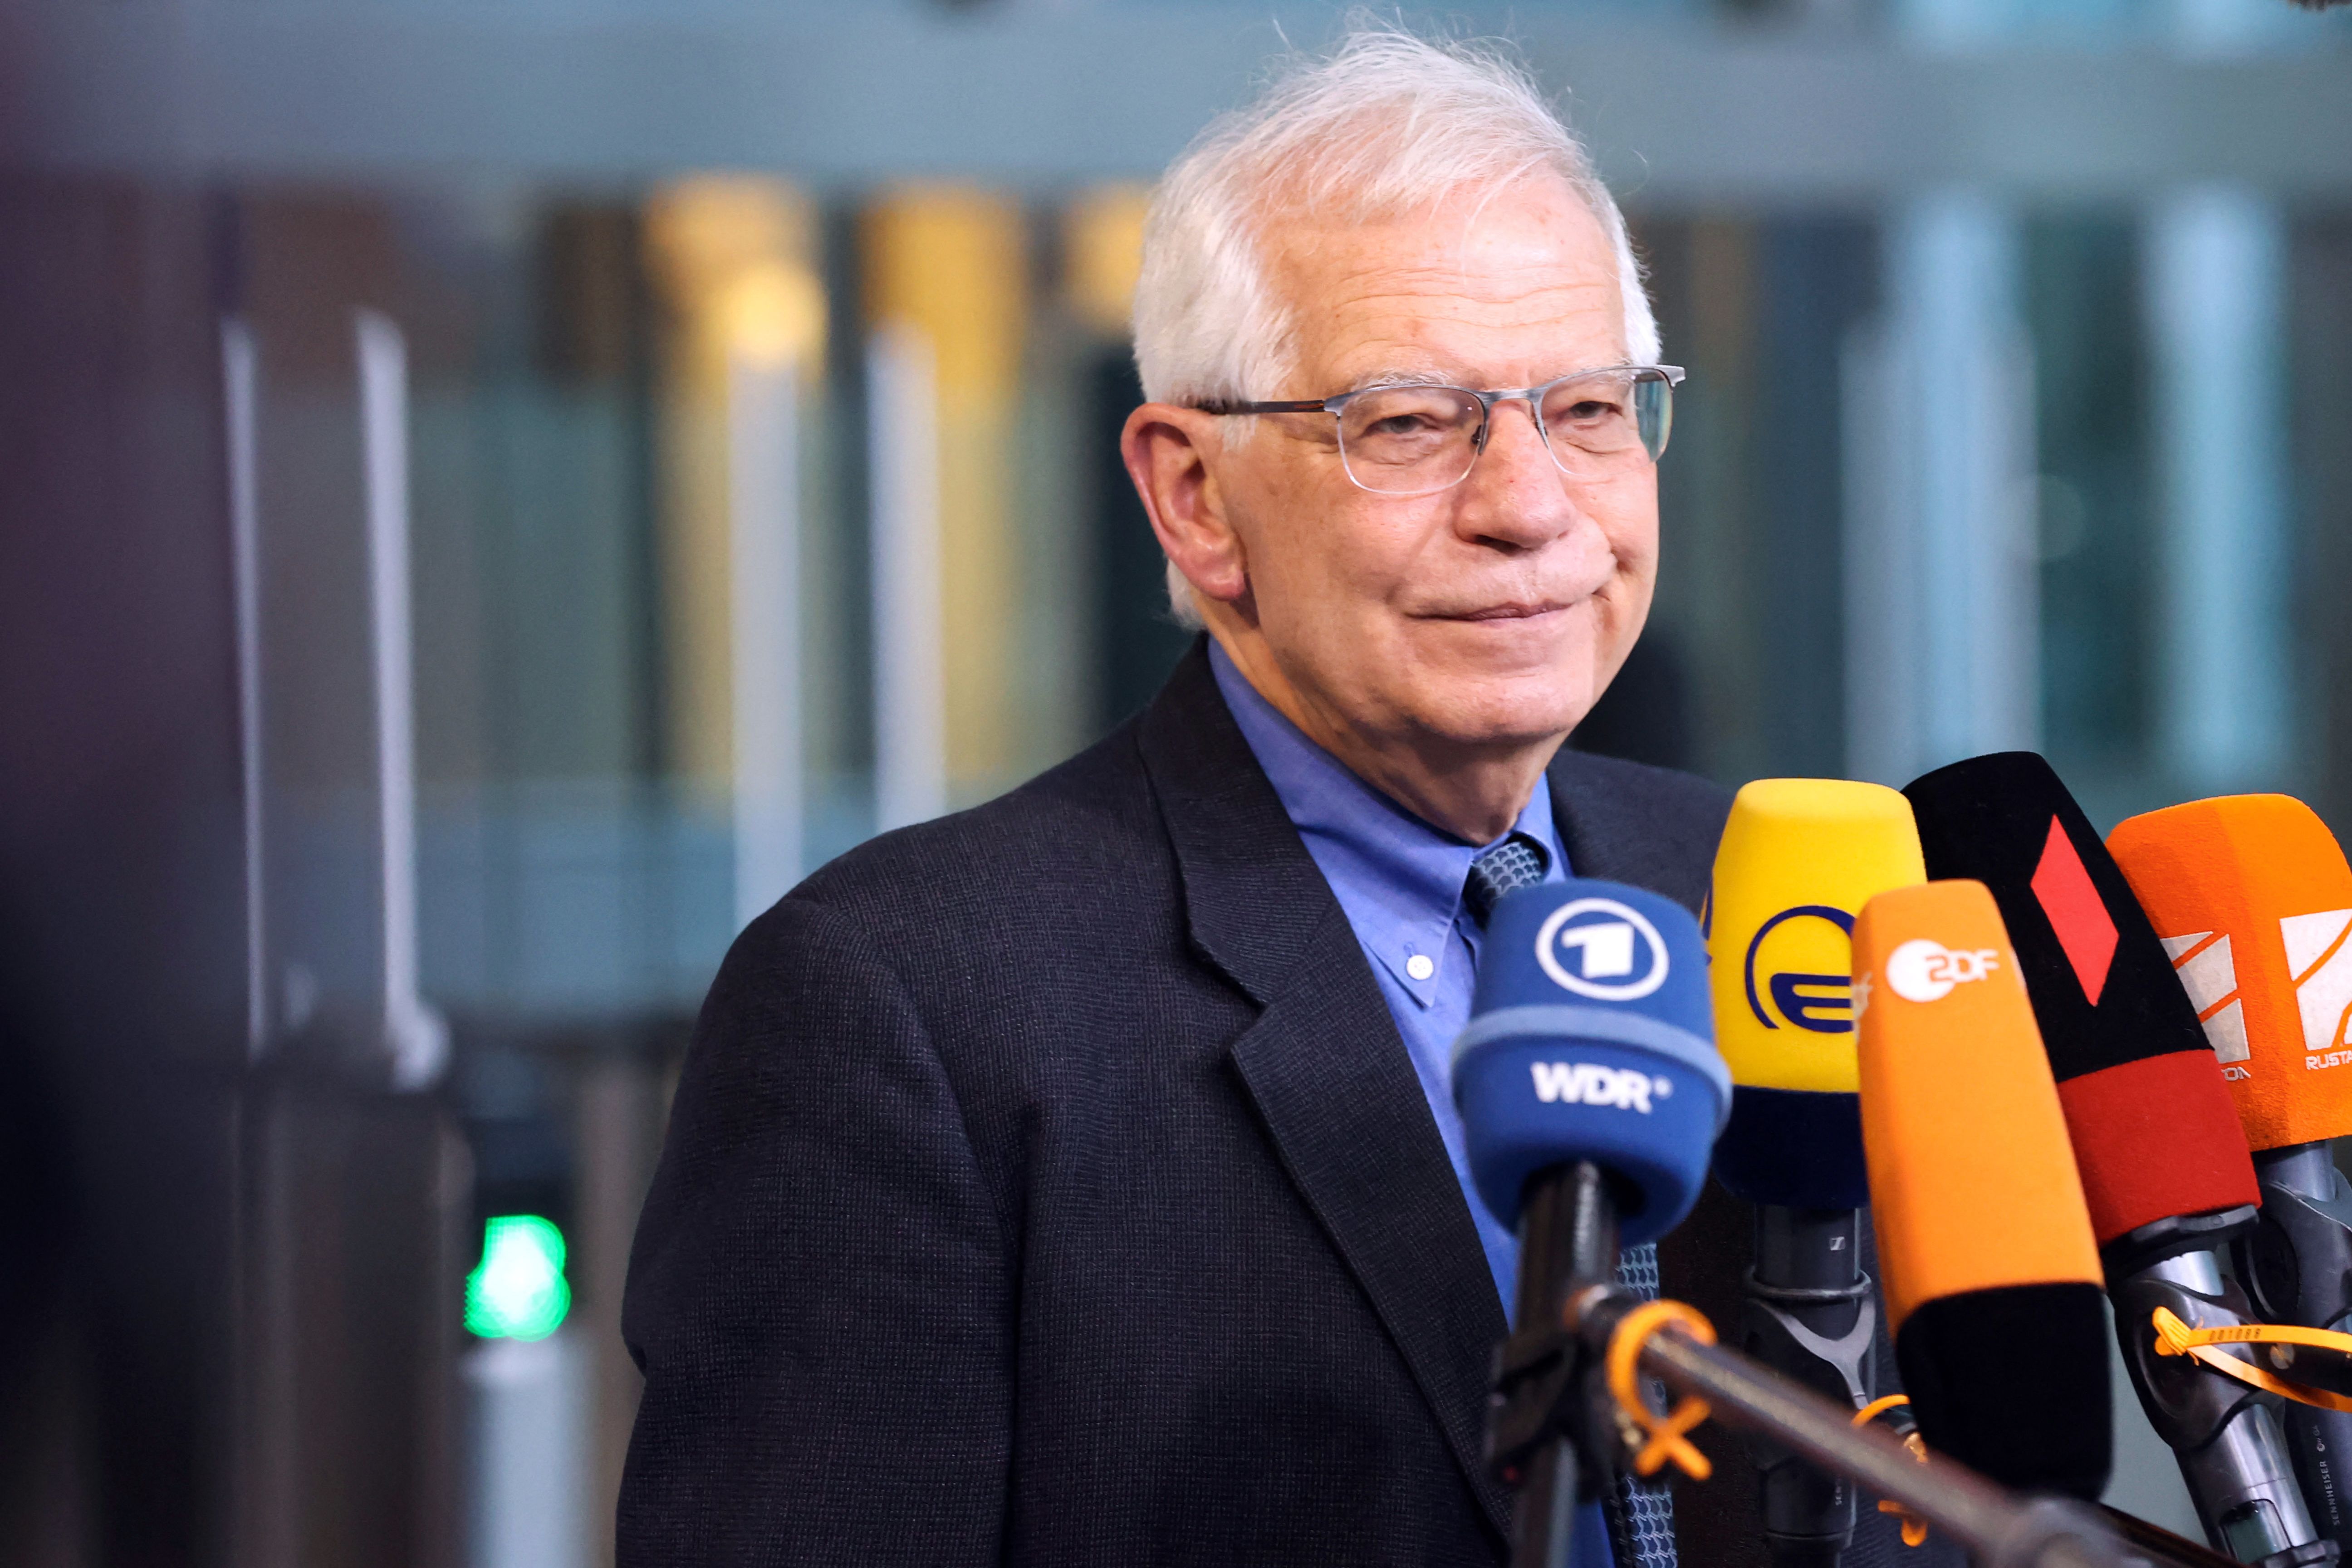 EU foreign policy chief Josep Borrell speaks to the media as he arrives for a meeting of NATO foreign ministers at NATO headquarters in Brussels on April 7.